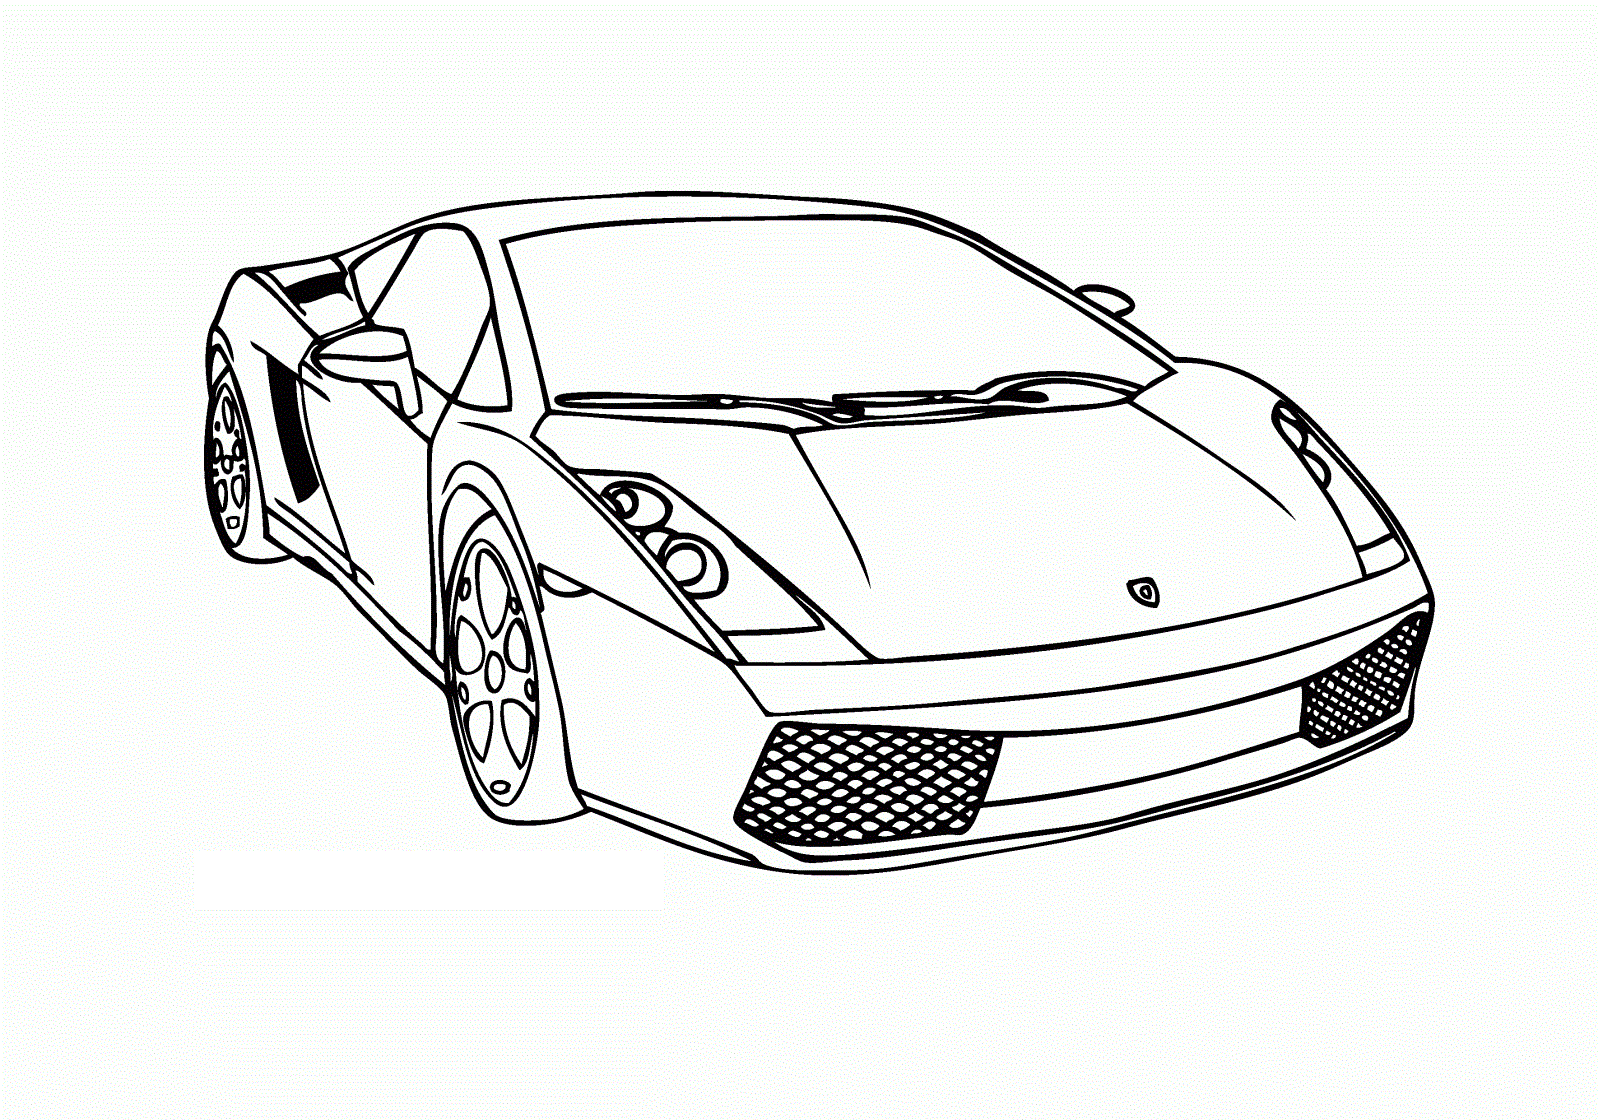 Car Coloring Pages   Best Coloring Pages For Kids